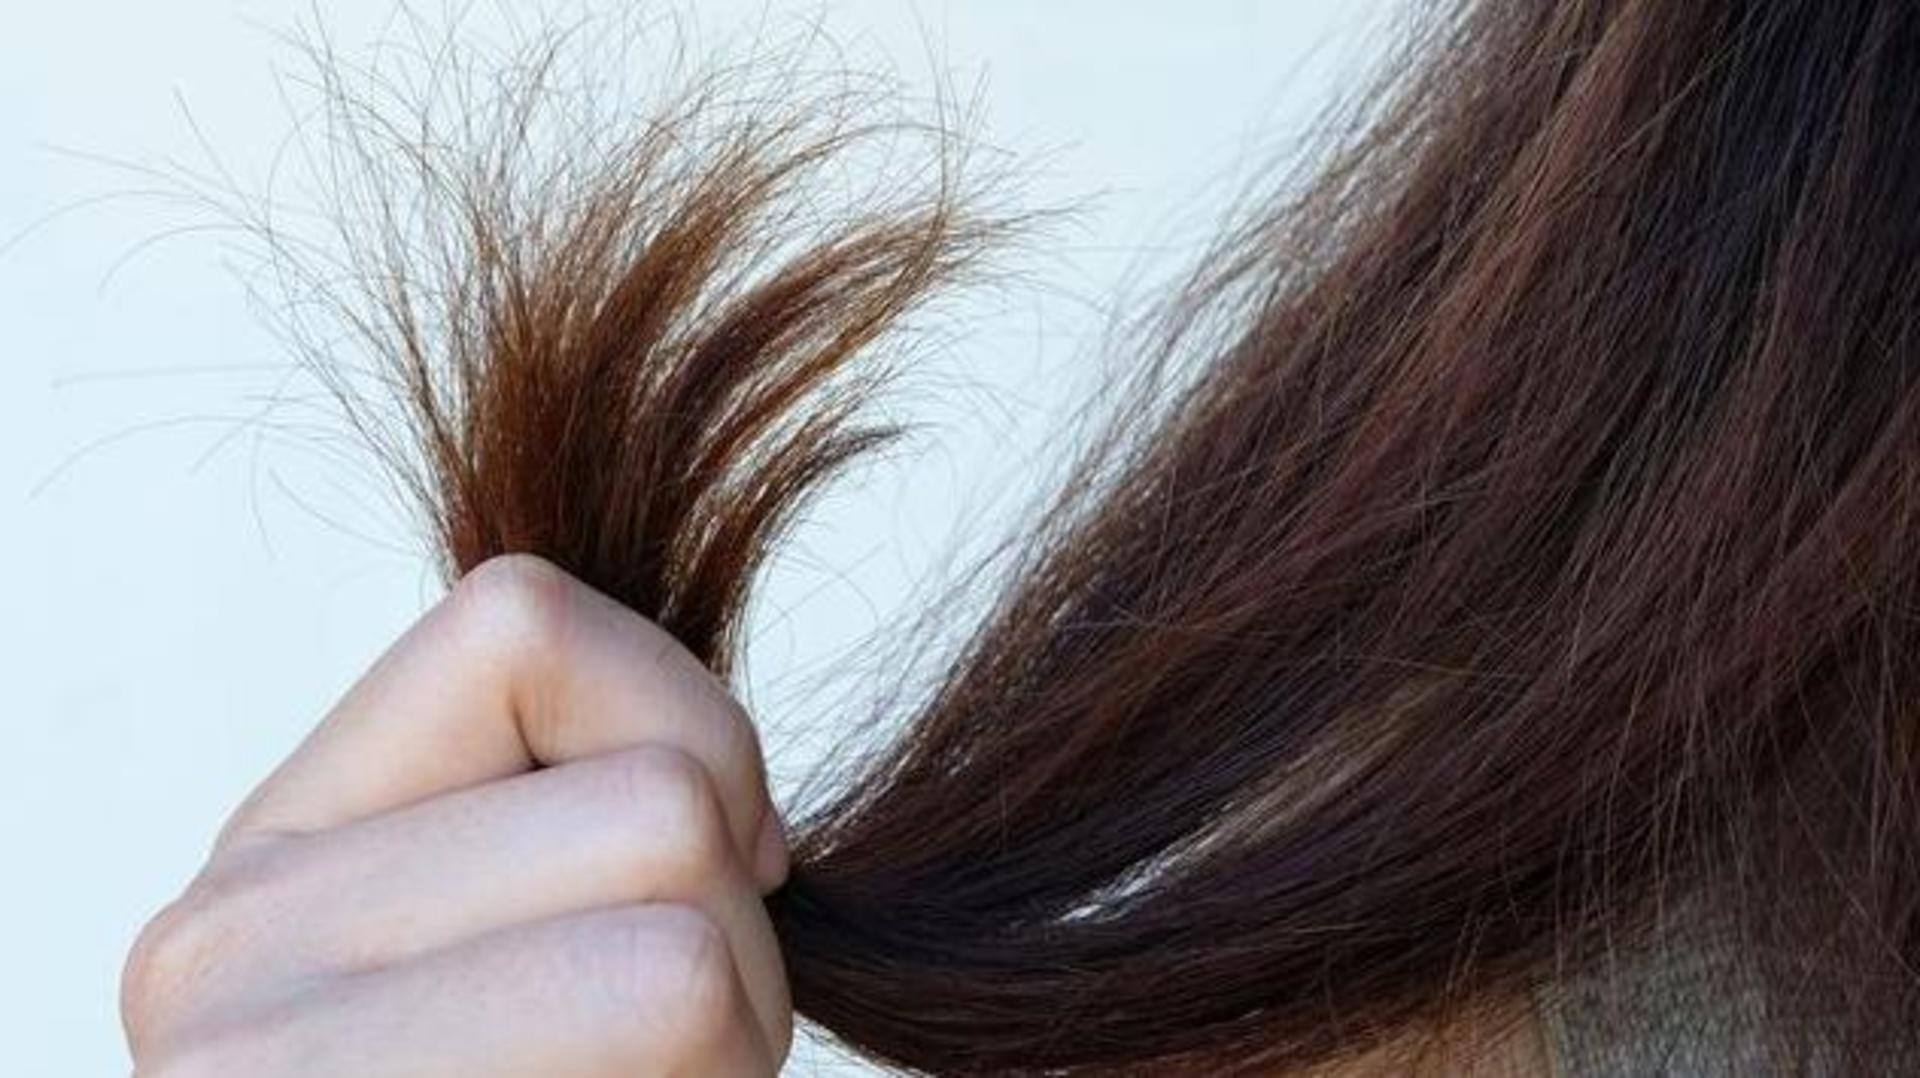 Brittle hair: Reasons and how to treat them